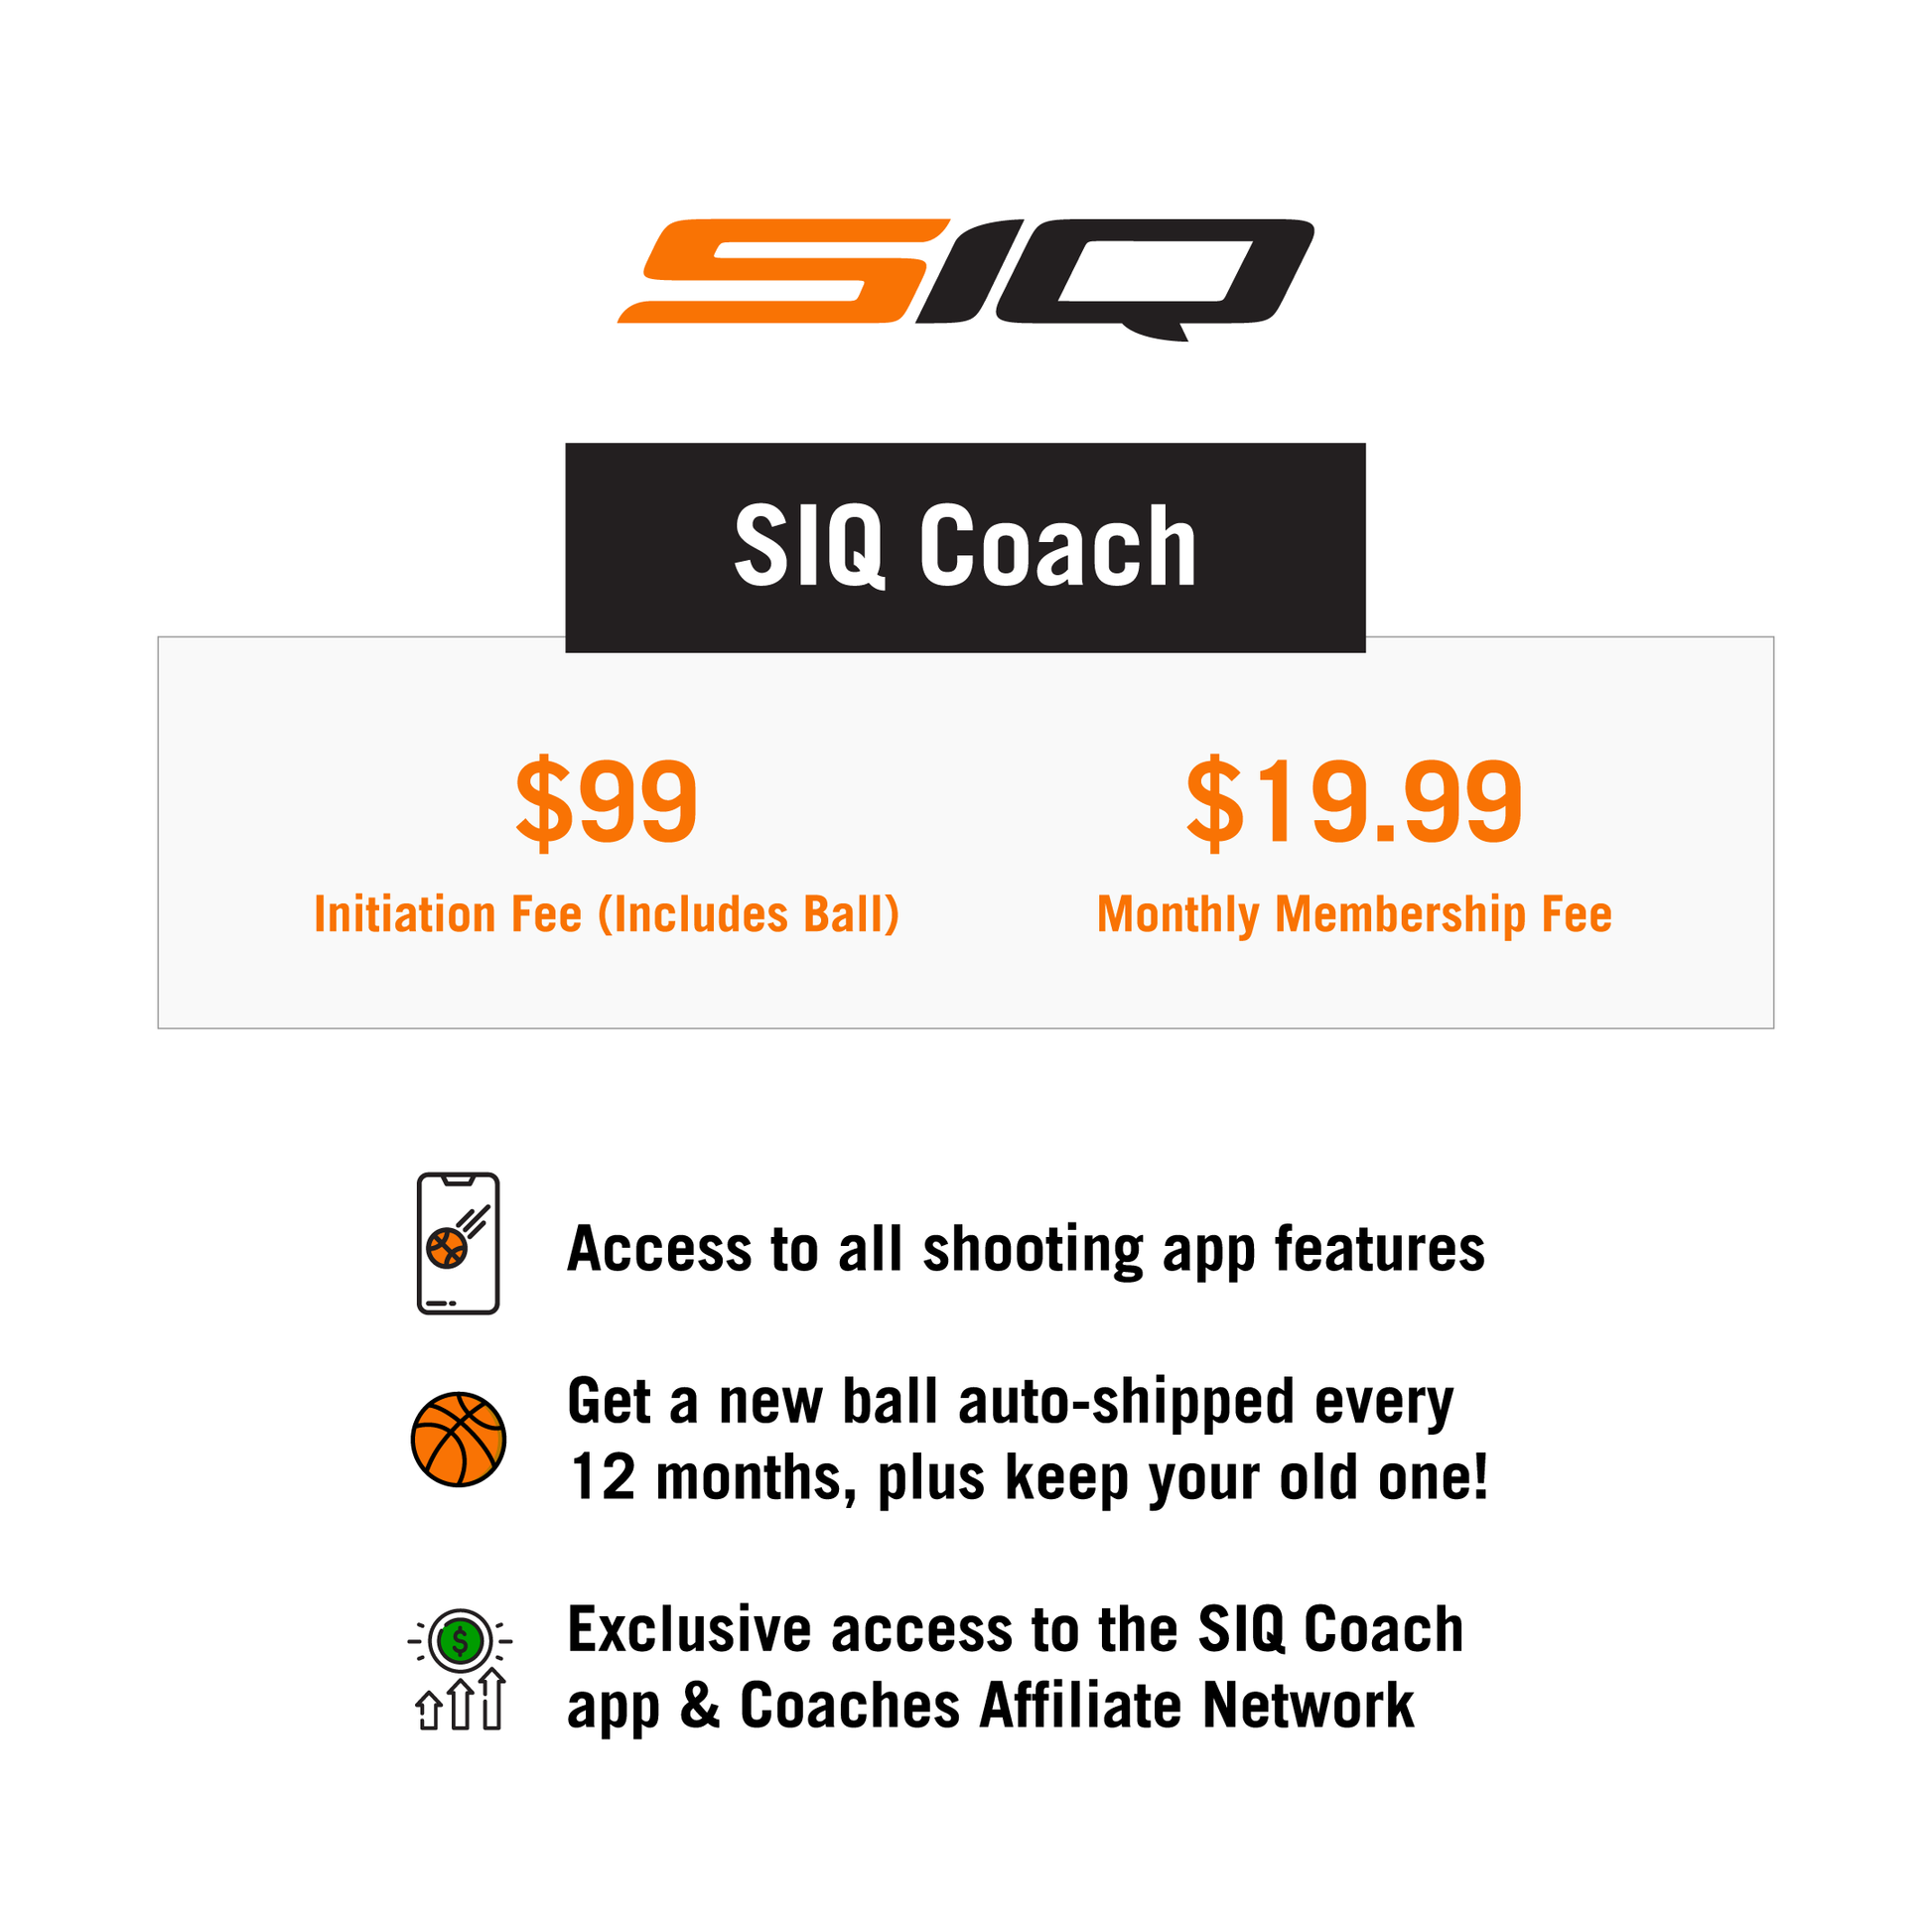 "SIQ Coach" app subscription icon. Prices are $99 for the basketball and a $19.99/month membership fee. Benefits are: access to all feature, a new ball auto-shipped every 12 months, exclusive access to the SIQ Coach app and Coaches affiliate network.  